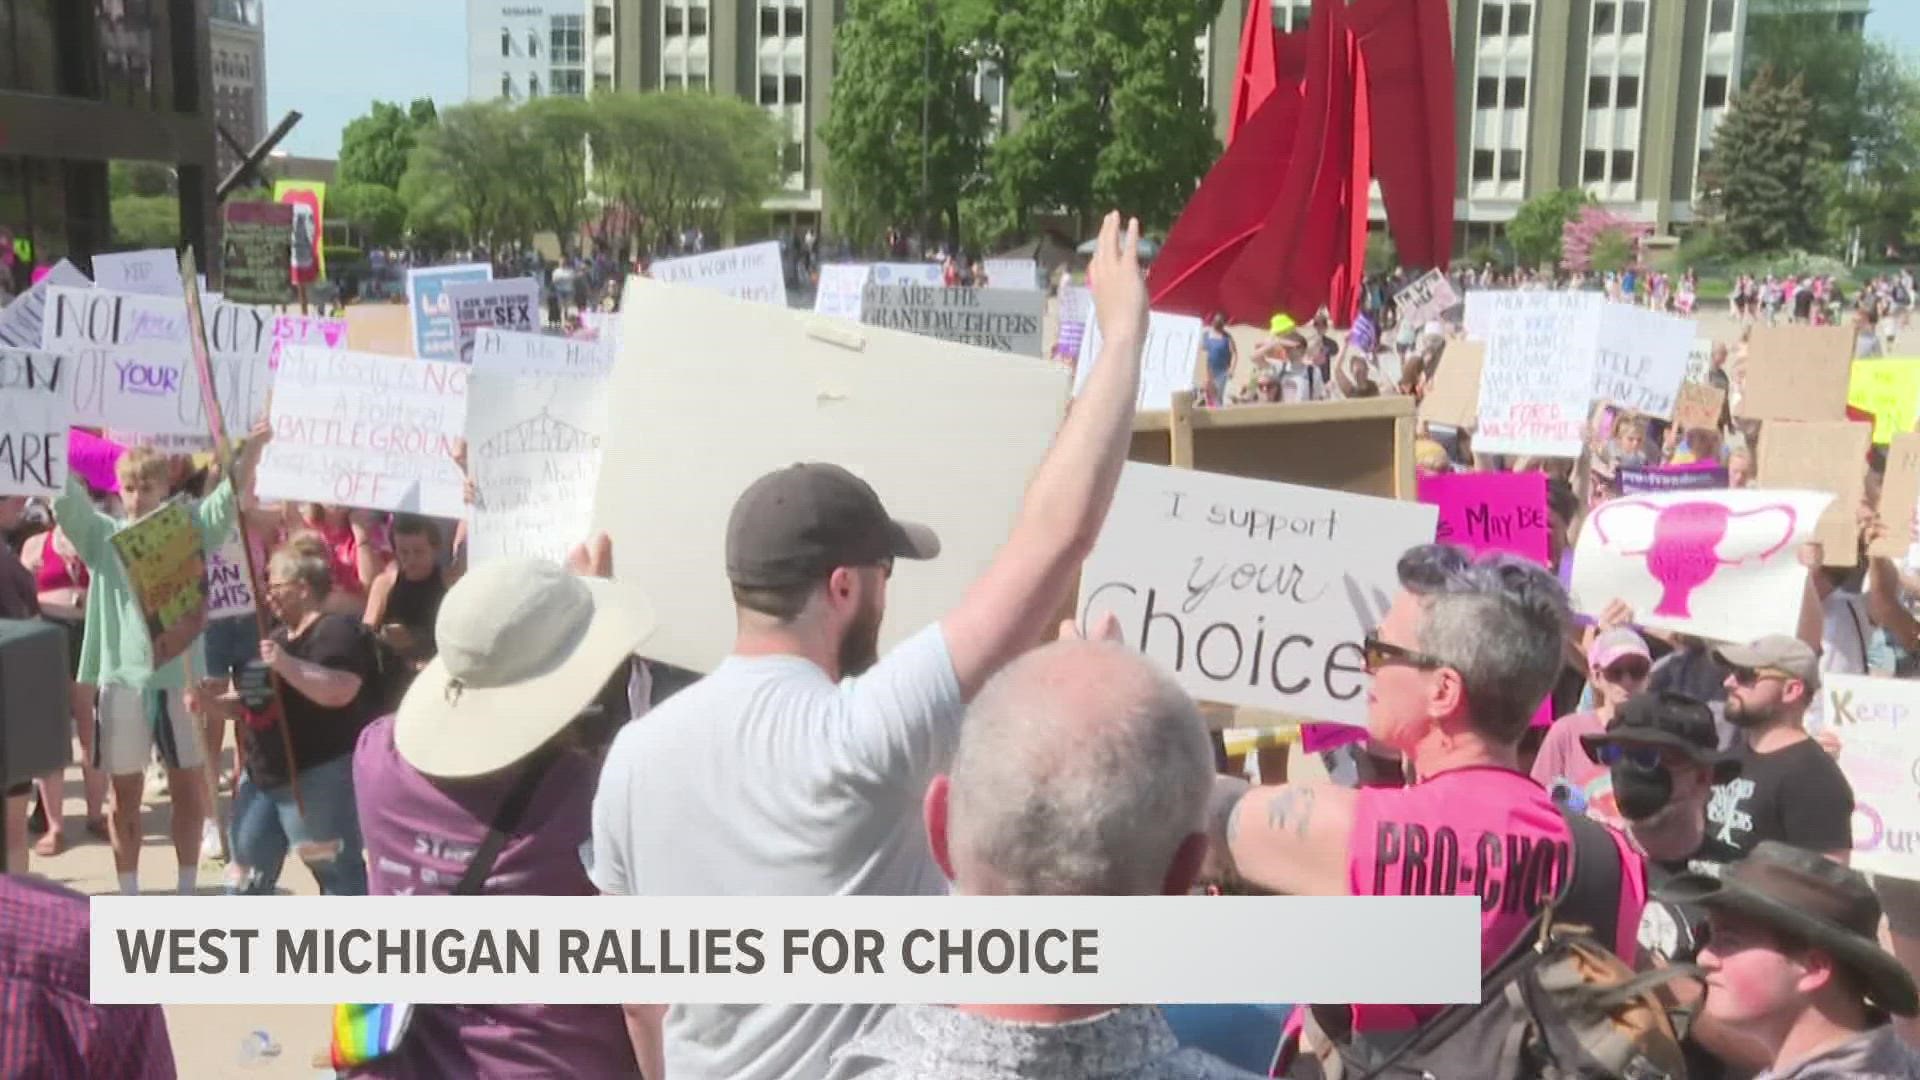 Women and pro-choice allies in West Michigan were vocal Saturday afternoon.